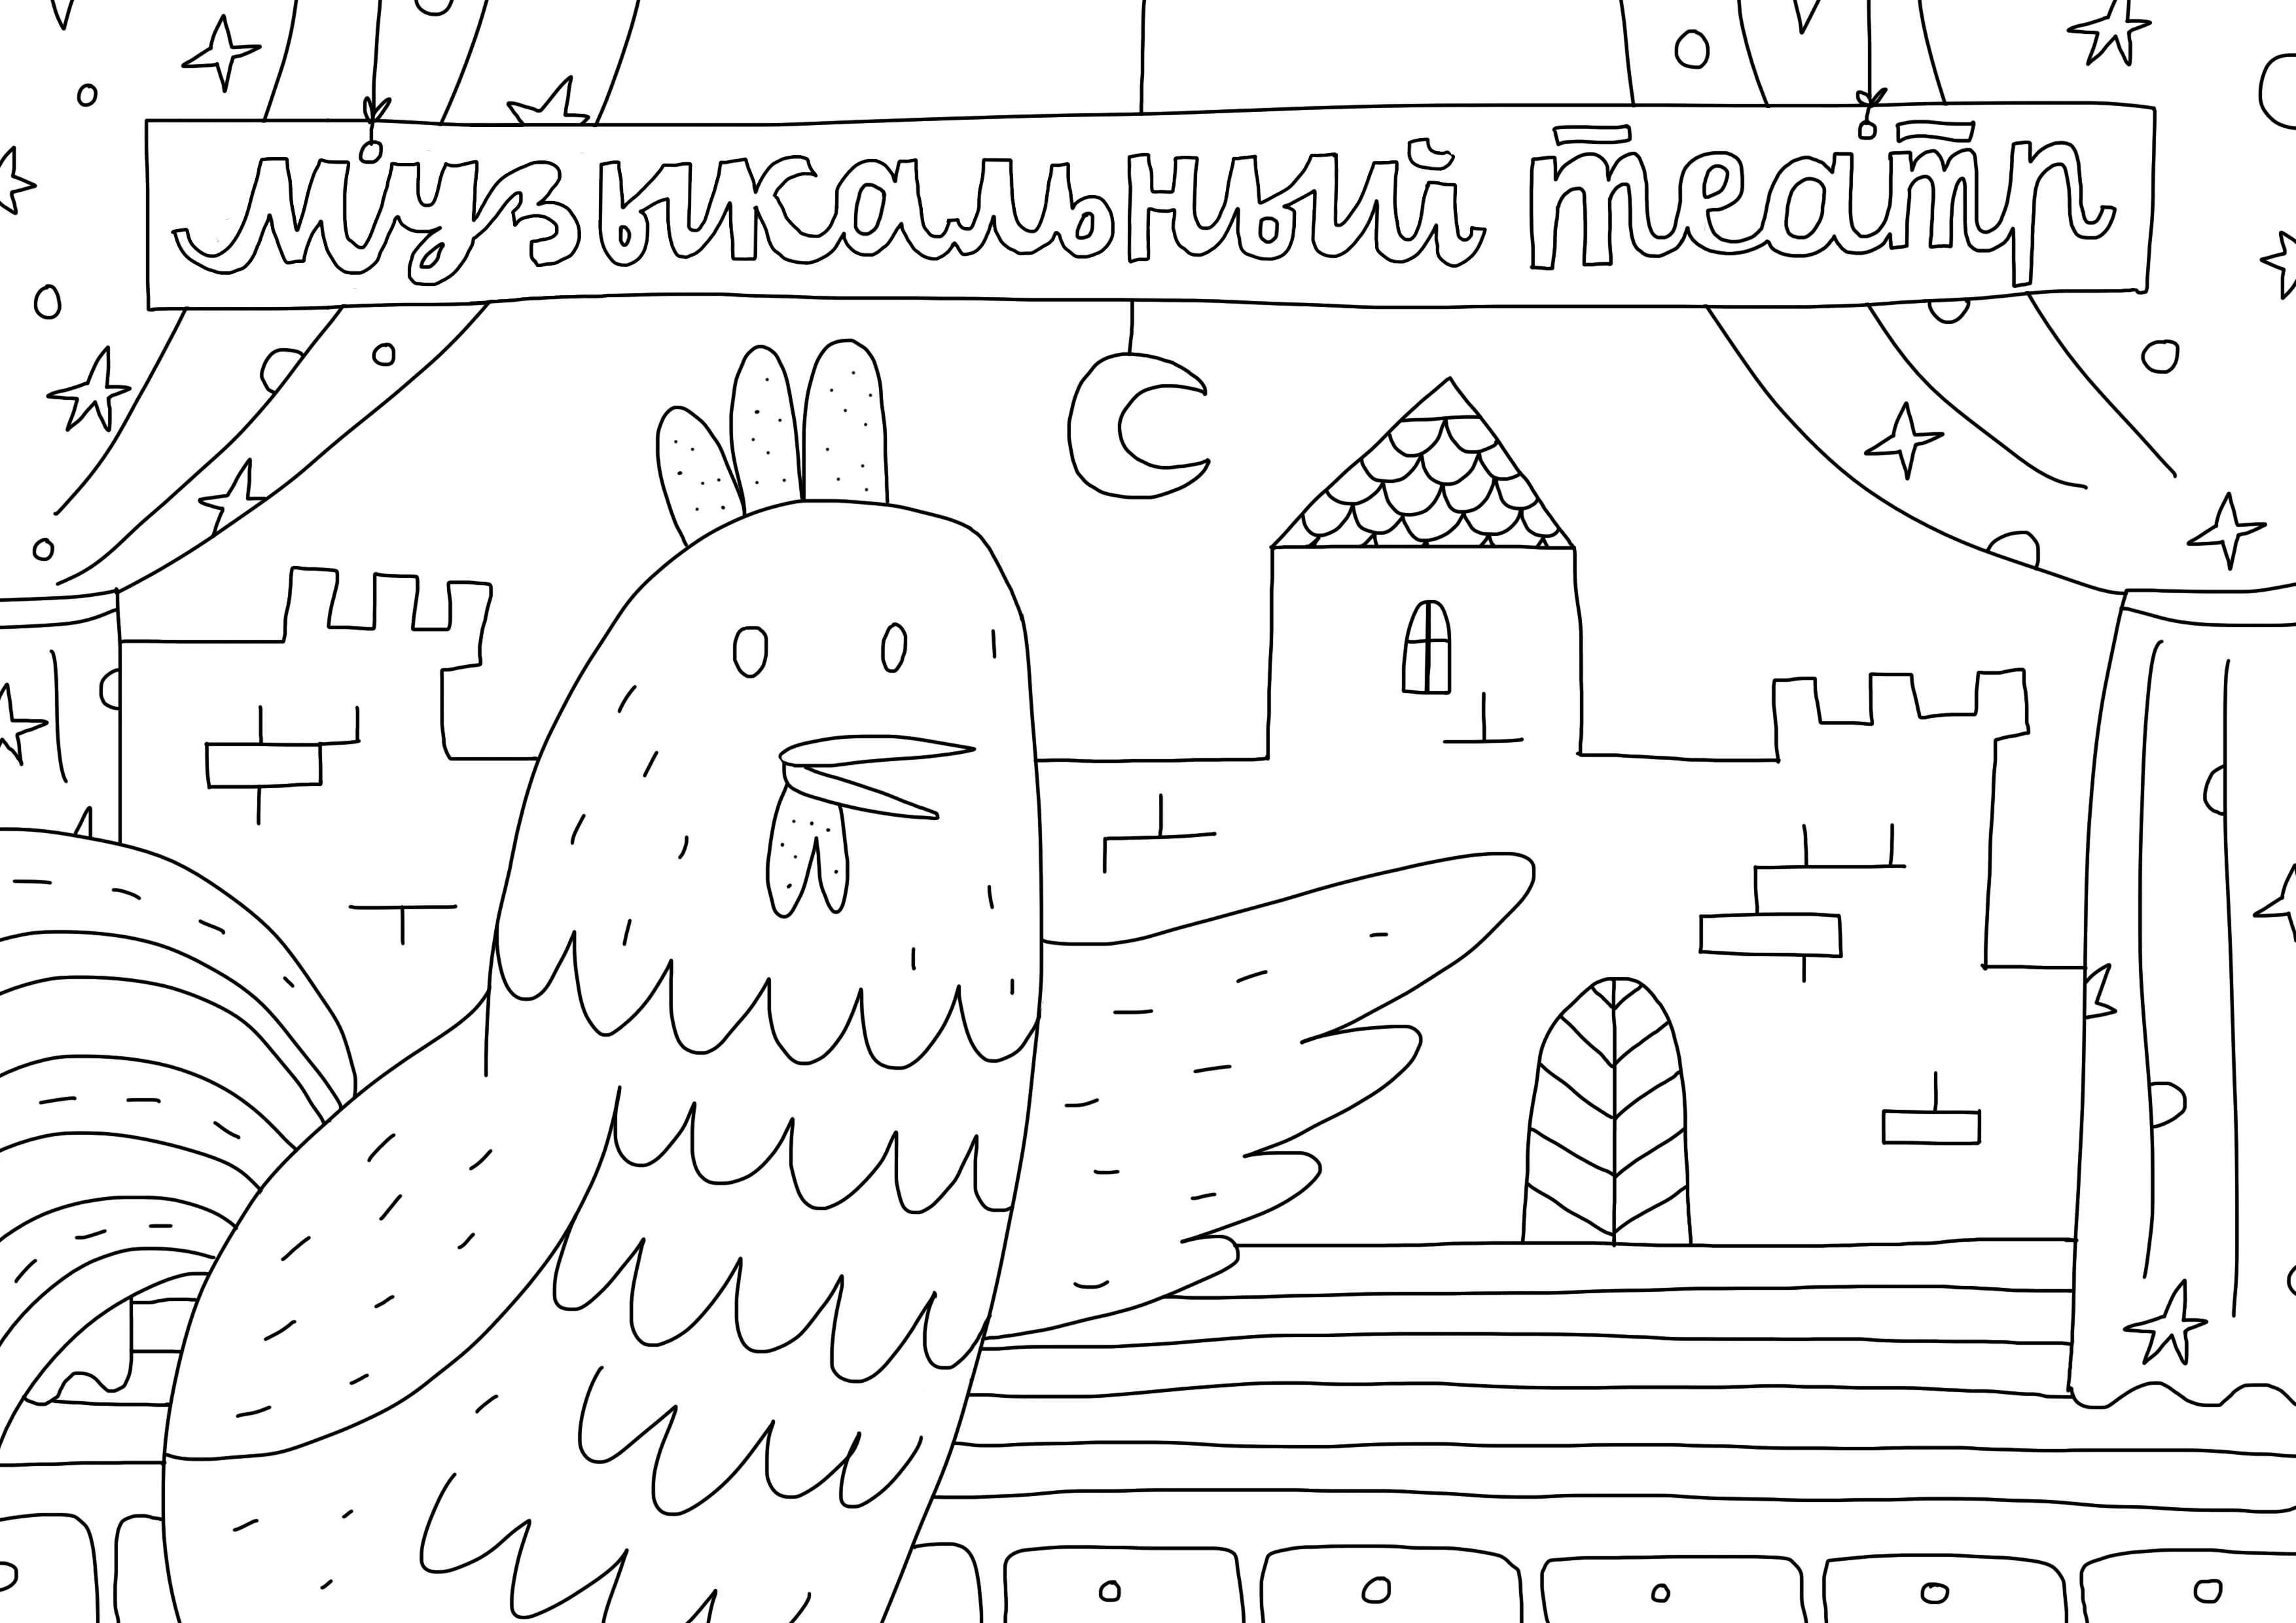 Innovation theater poster coloring page